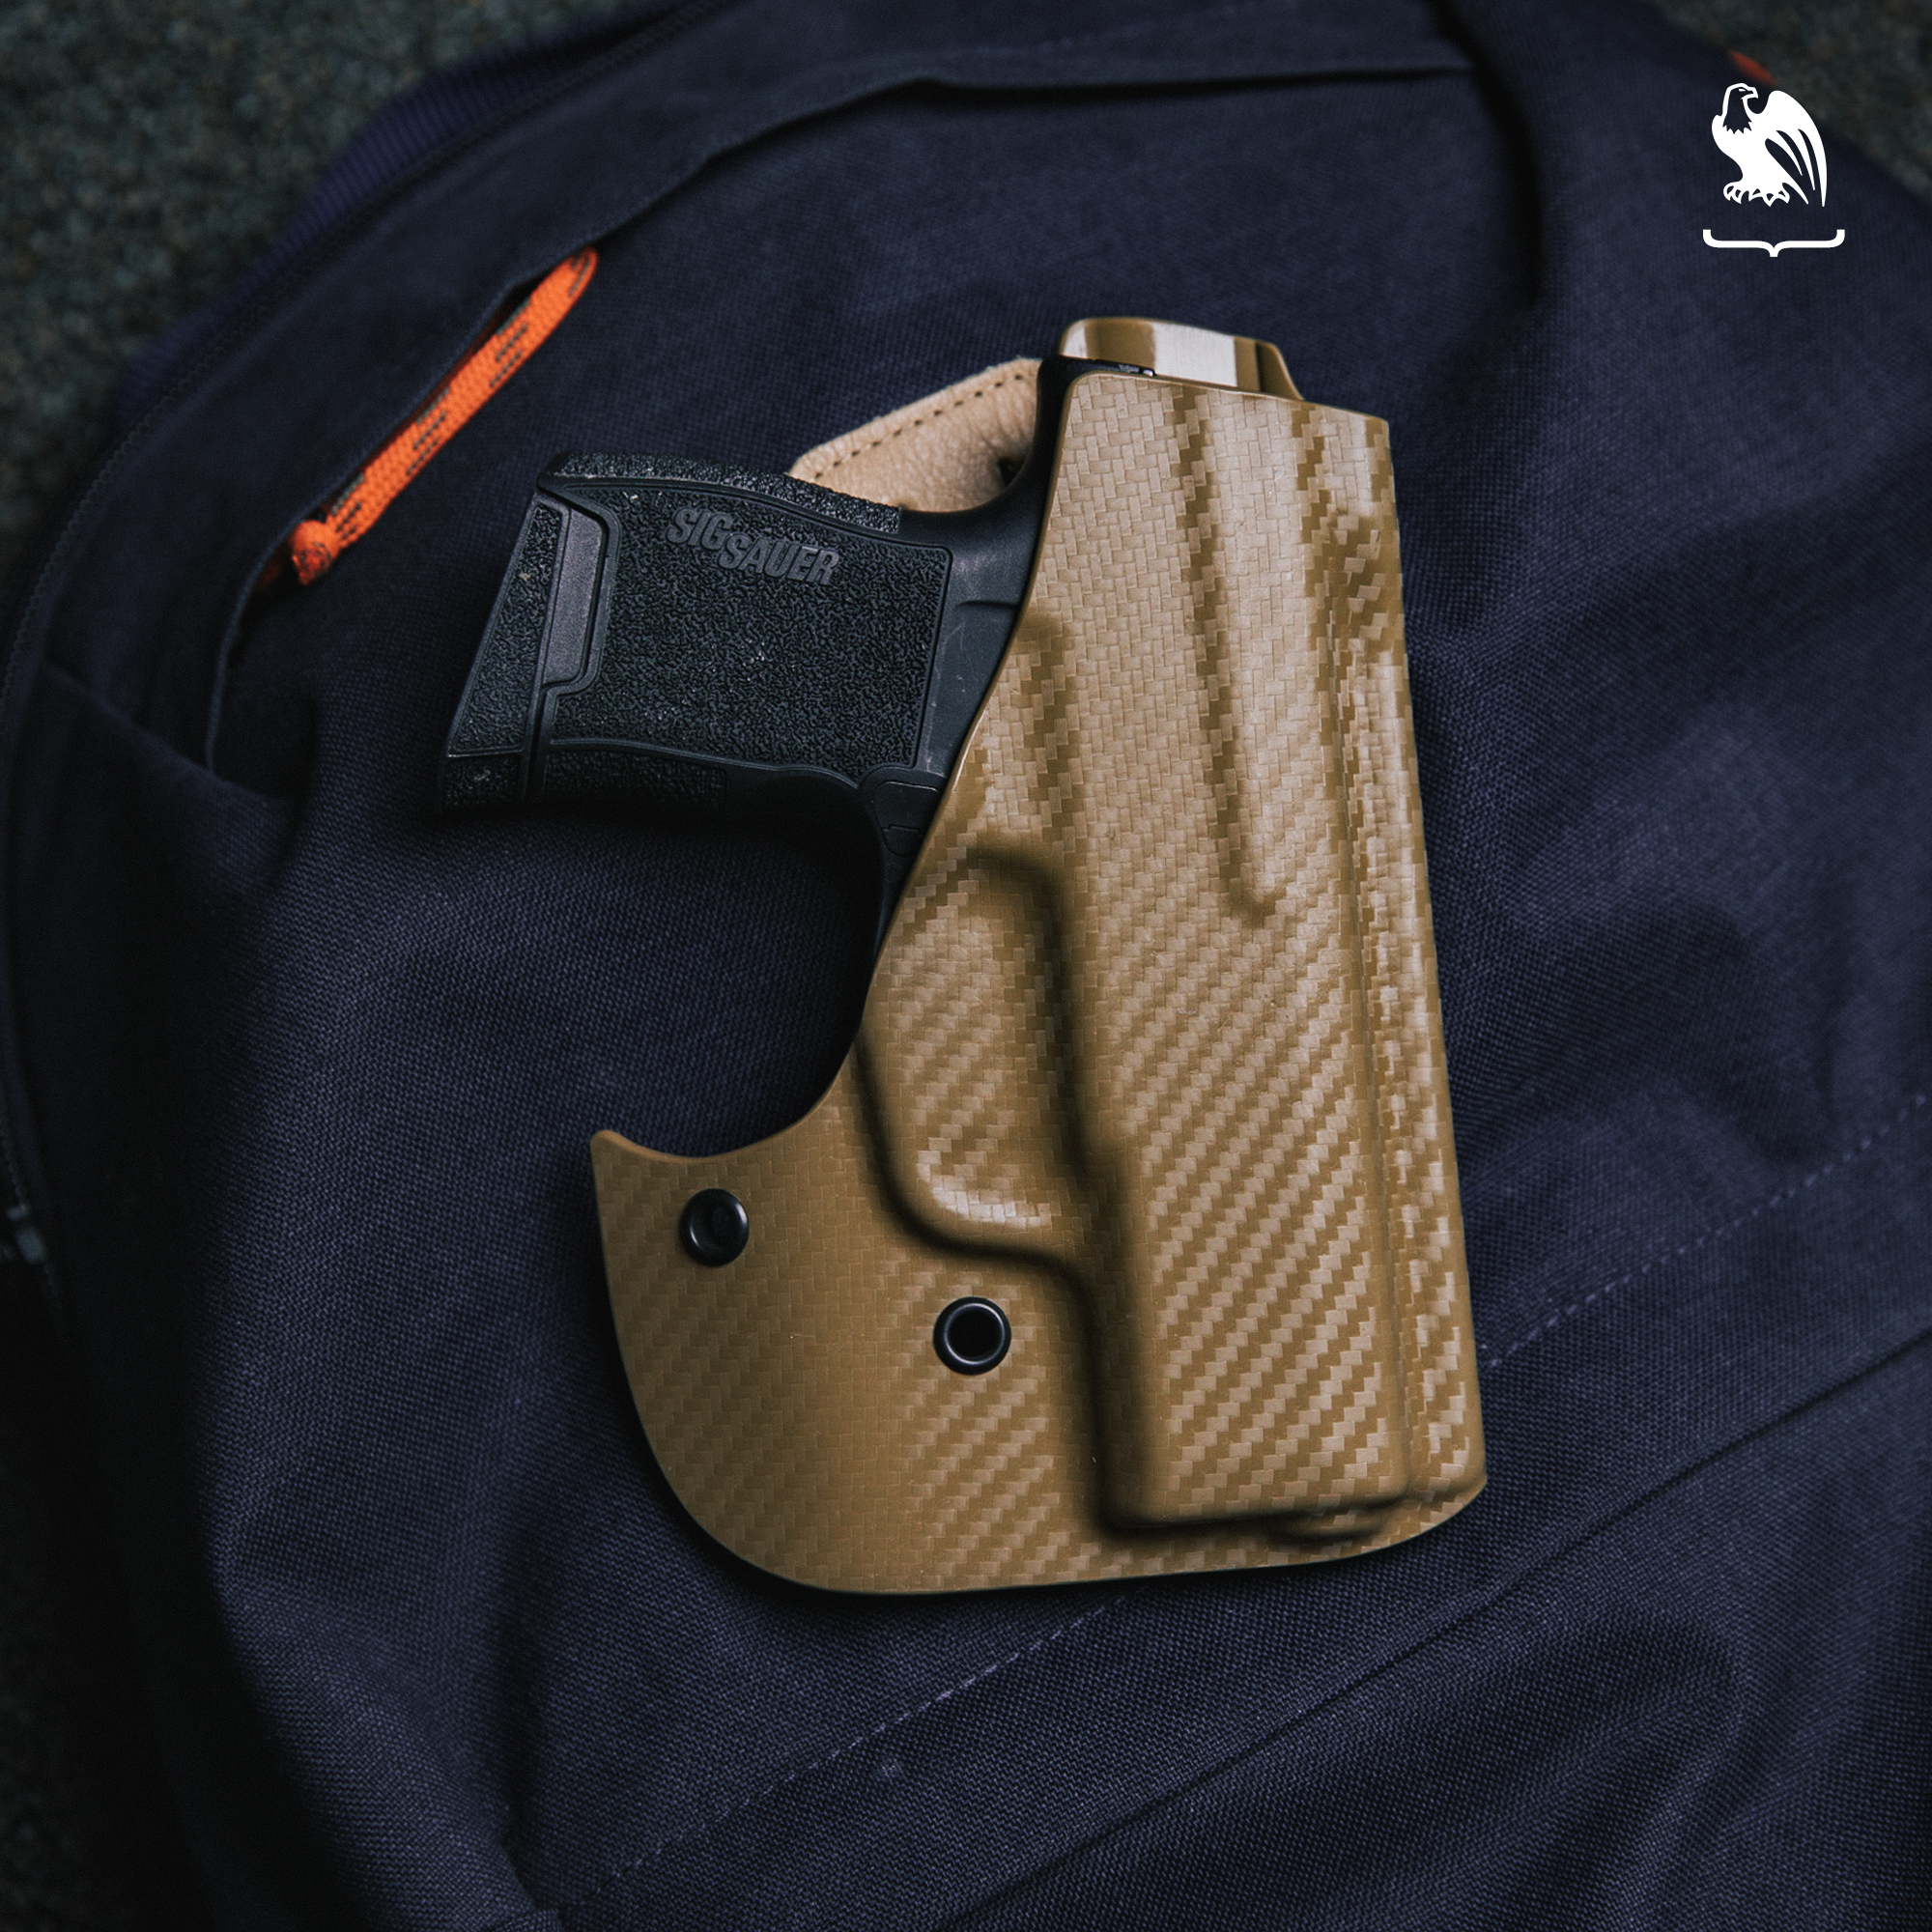 Off body carry pocket holster